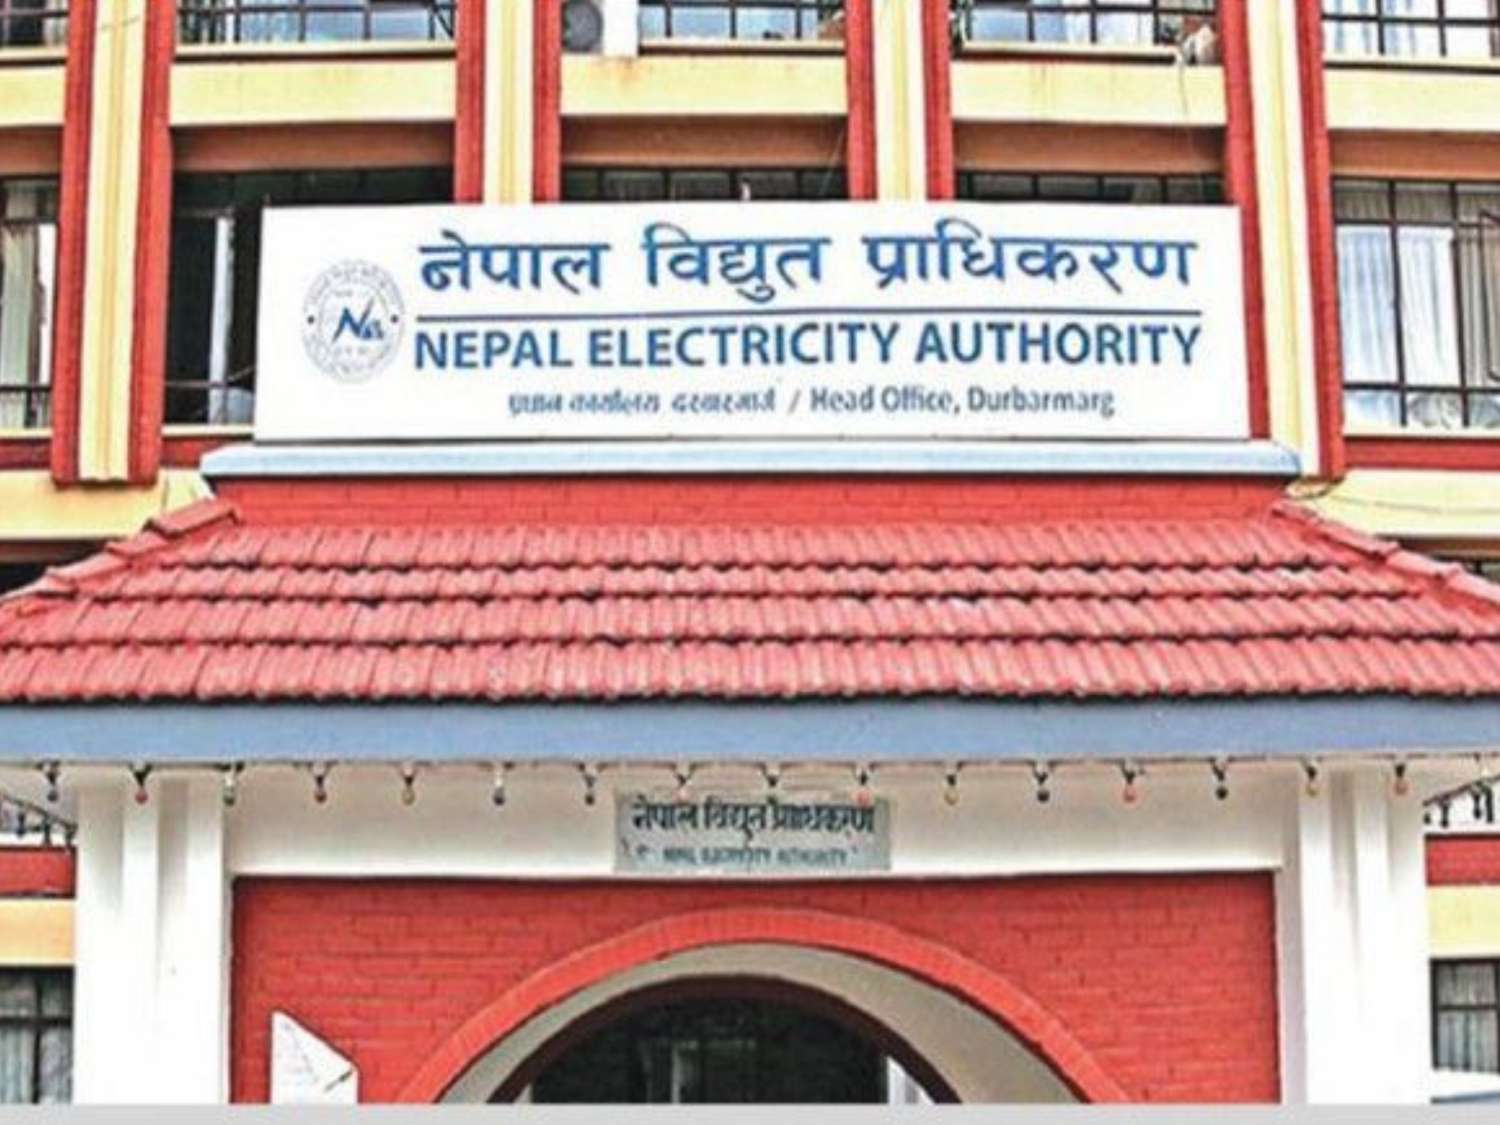 NEA to Build Substations and Transmission Lines in Kathmandu Valley